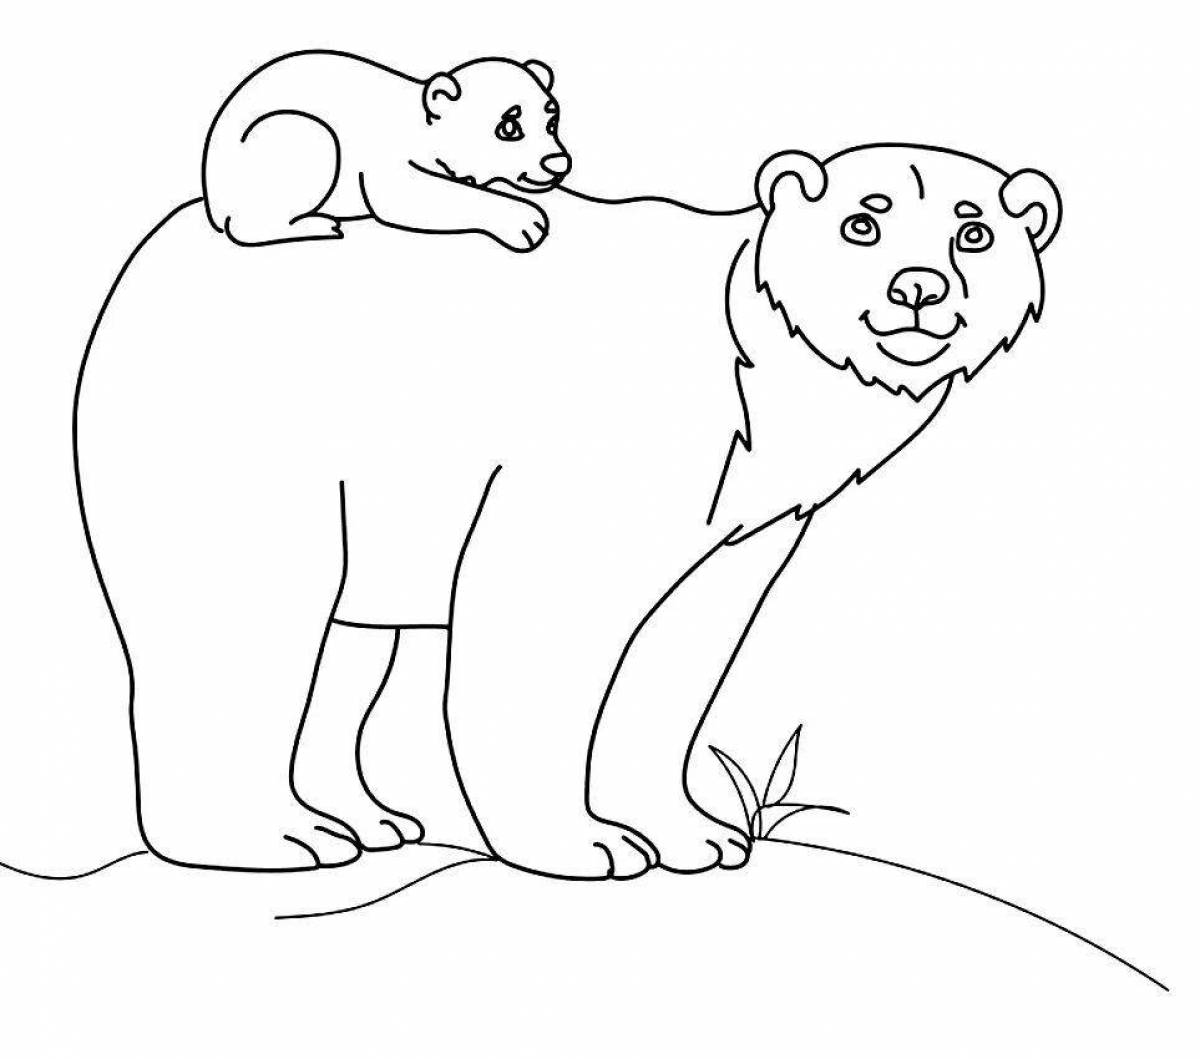 Coloring page majestic polar bear with cub